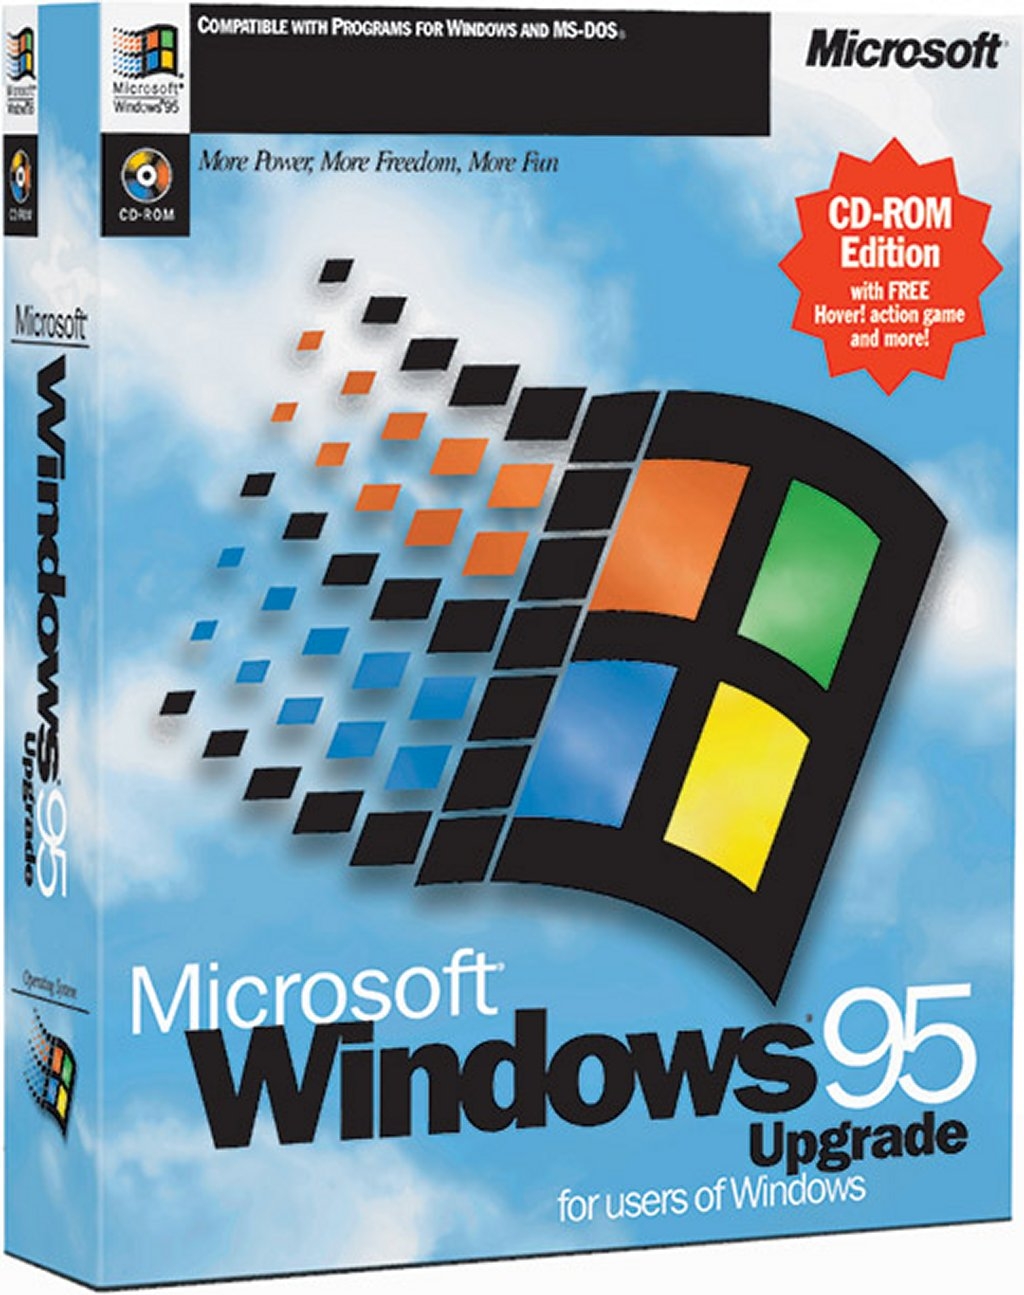 windows 95 iso image download